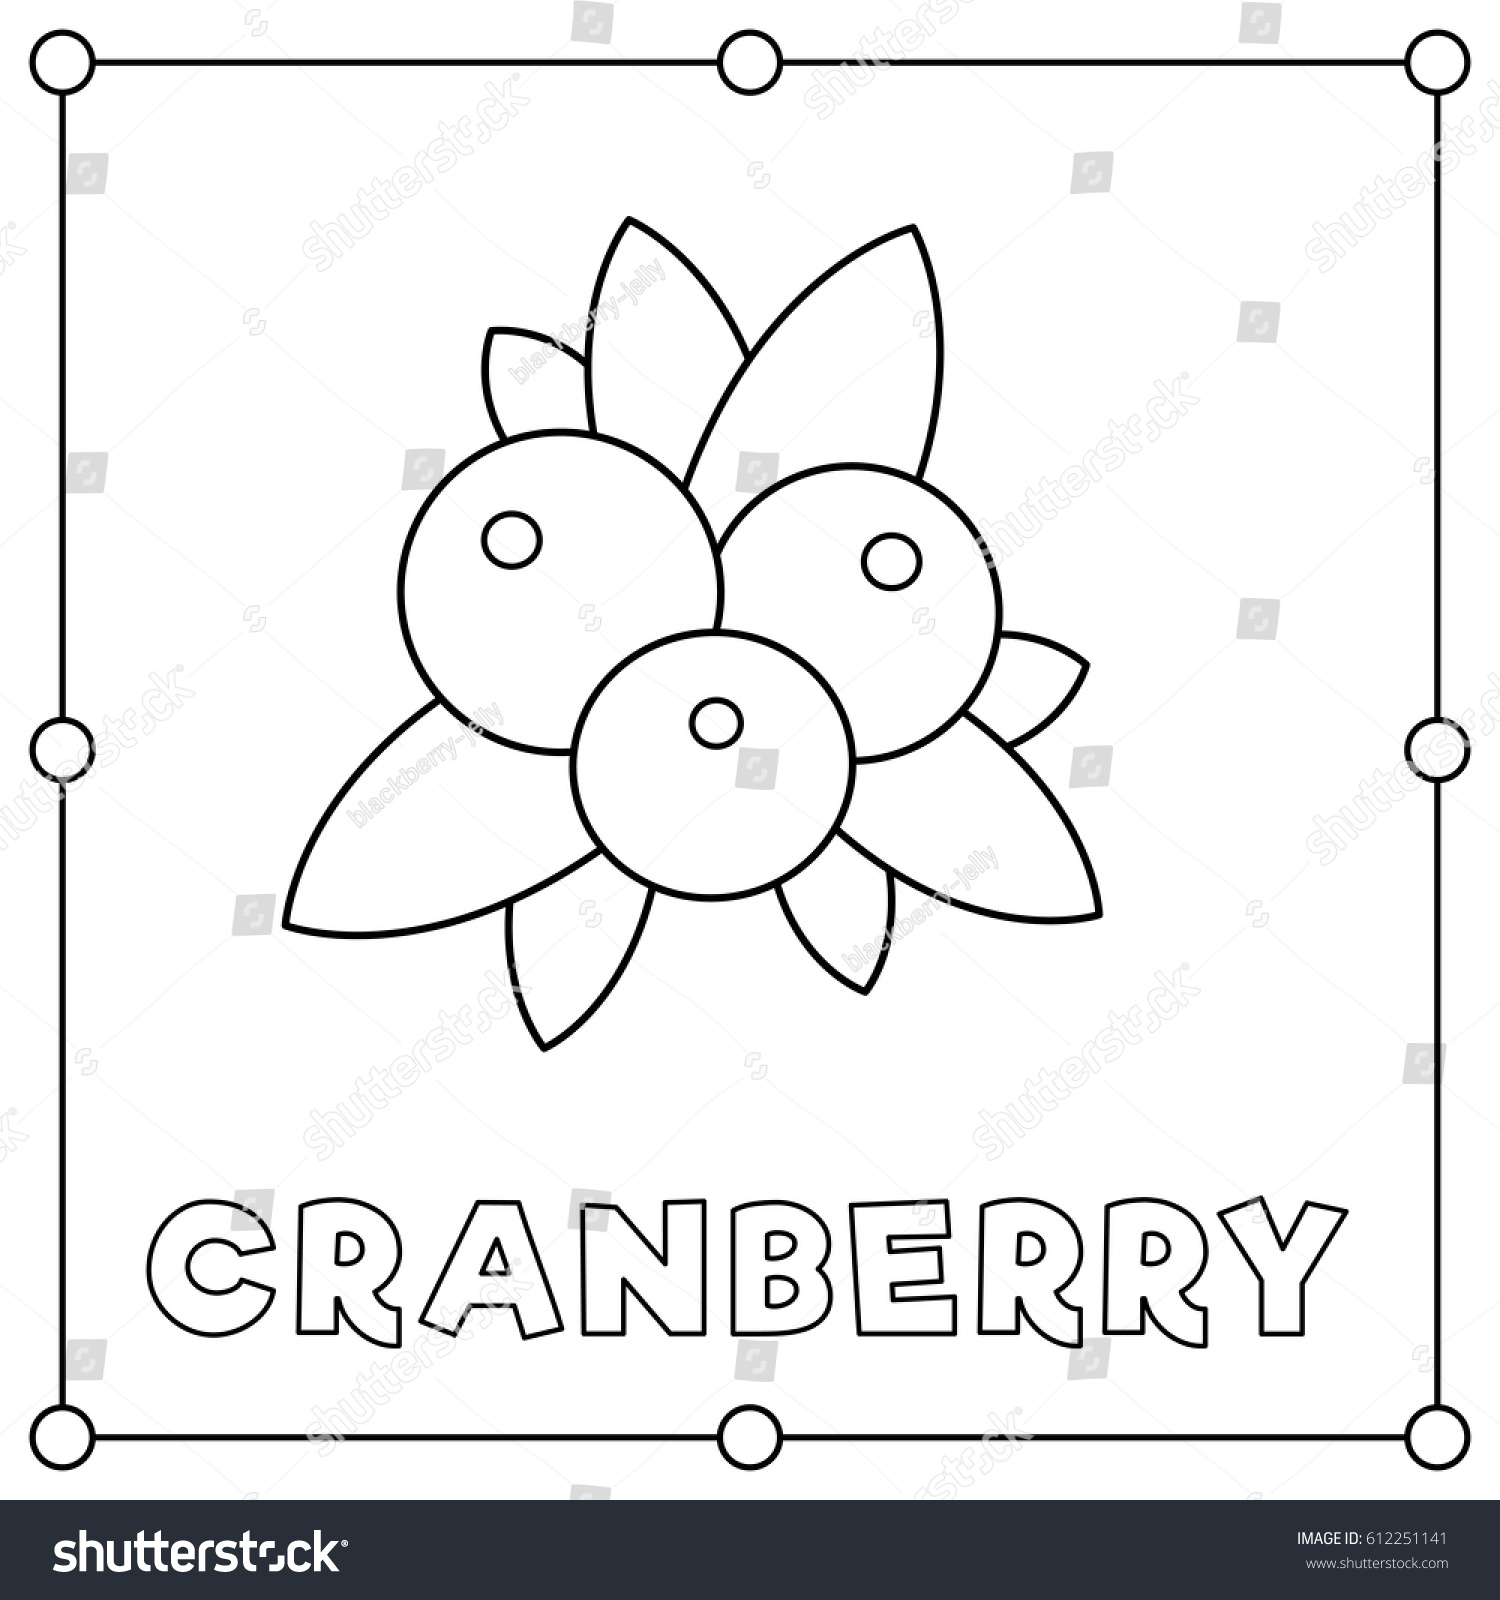 Black white illustration cranberry coloring page stock vector royalty free